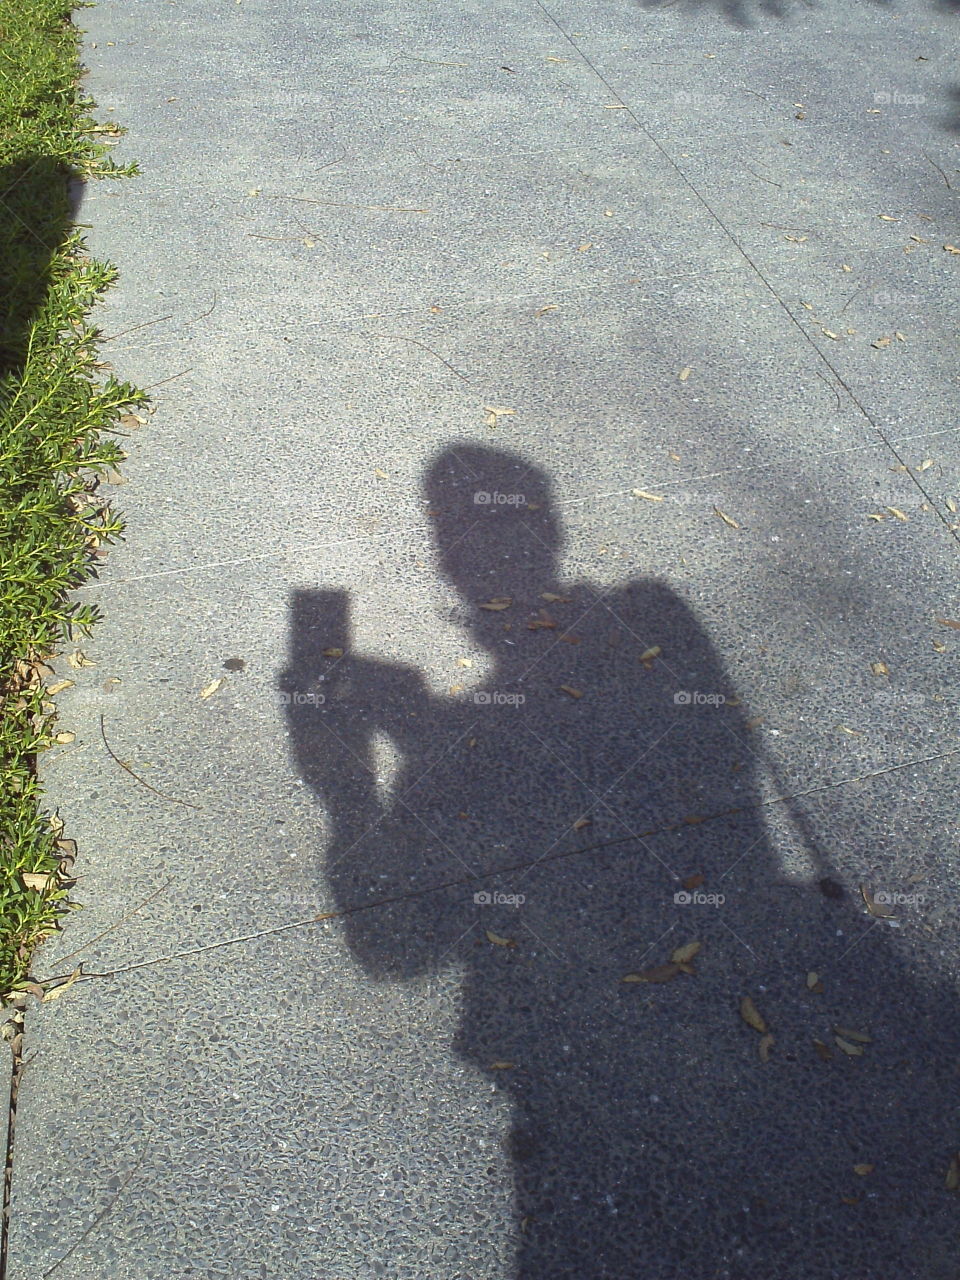 My Shadow at Work